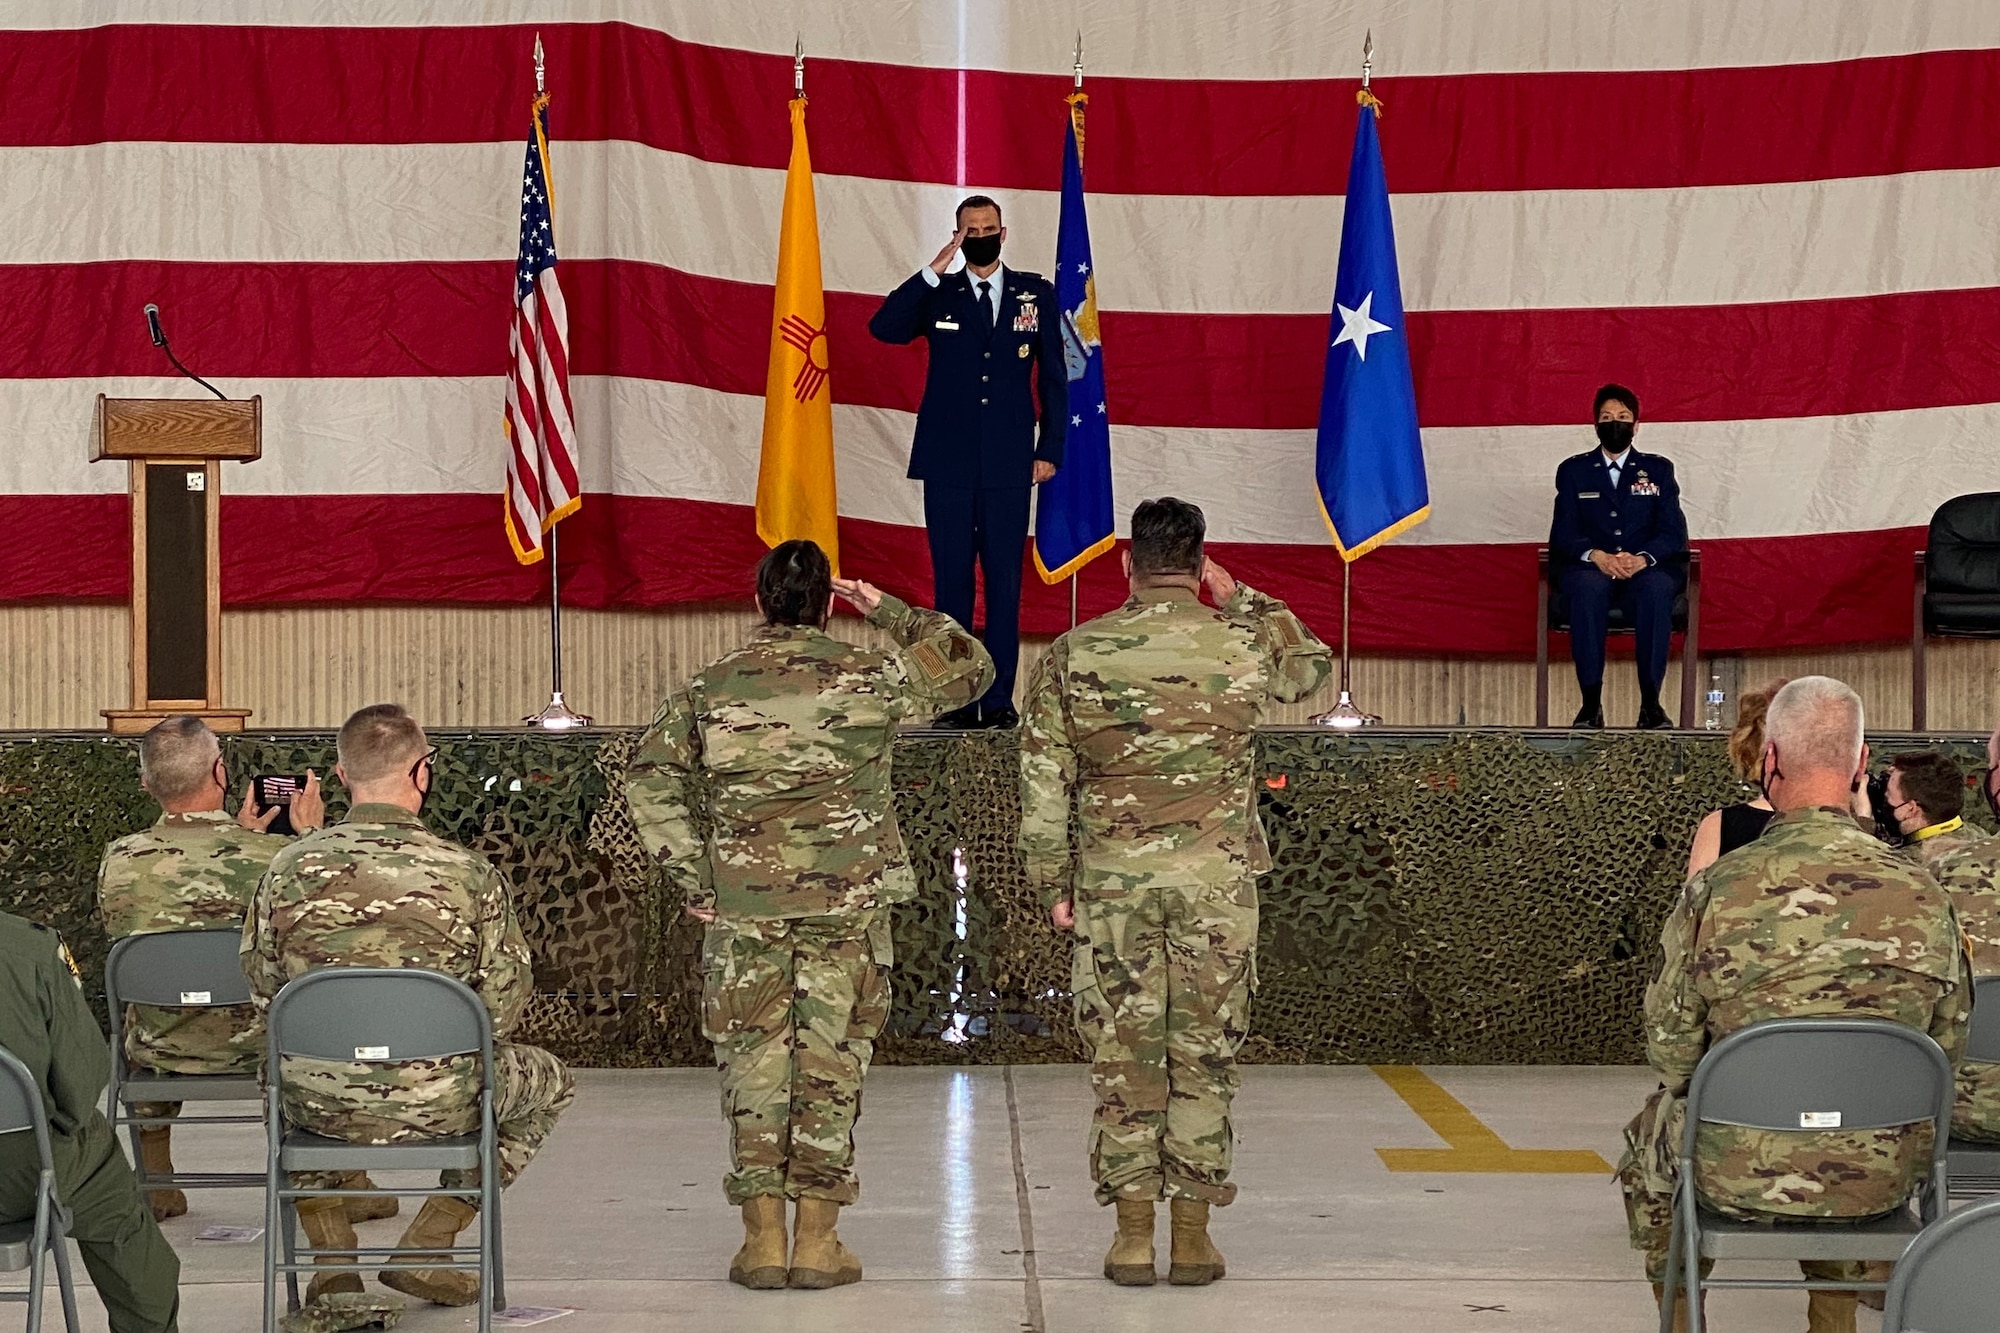 Col. Sefzik stands on the center of the stage holding a salute, with an American flag, New Mexico State flag, Air National Guard flag, and brigadier general one star flag behind him. on the floor two airmen salute Col. Sefzik as a crowd of soldiers and airmen watch